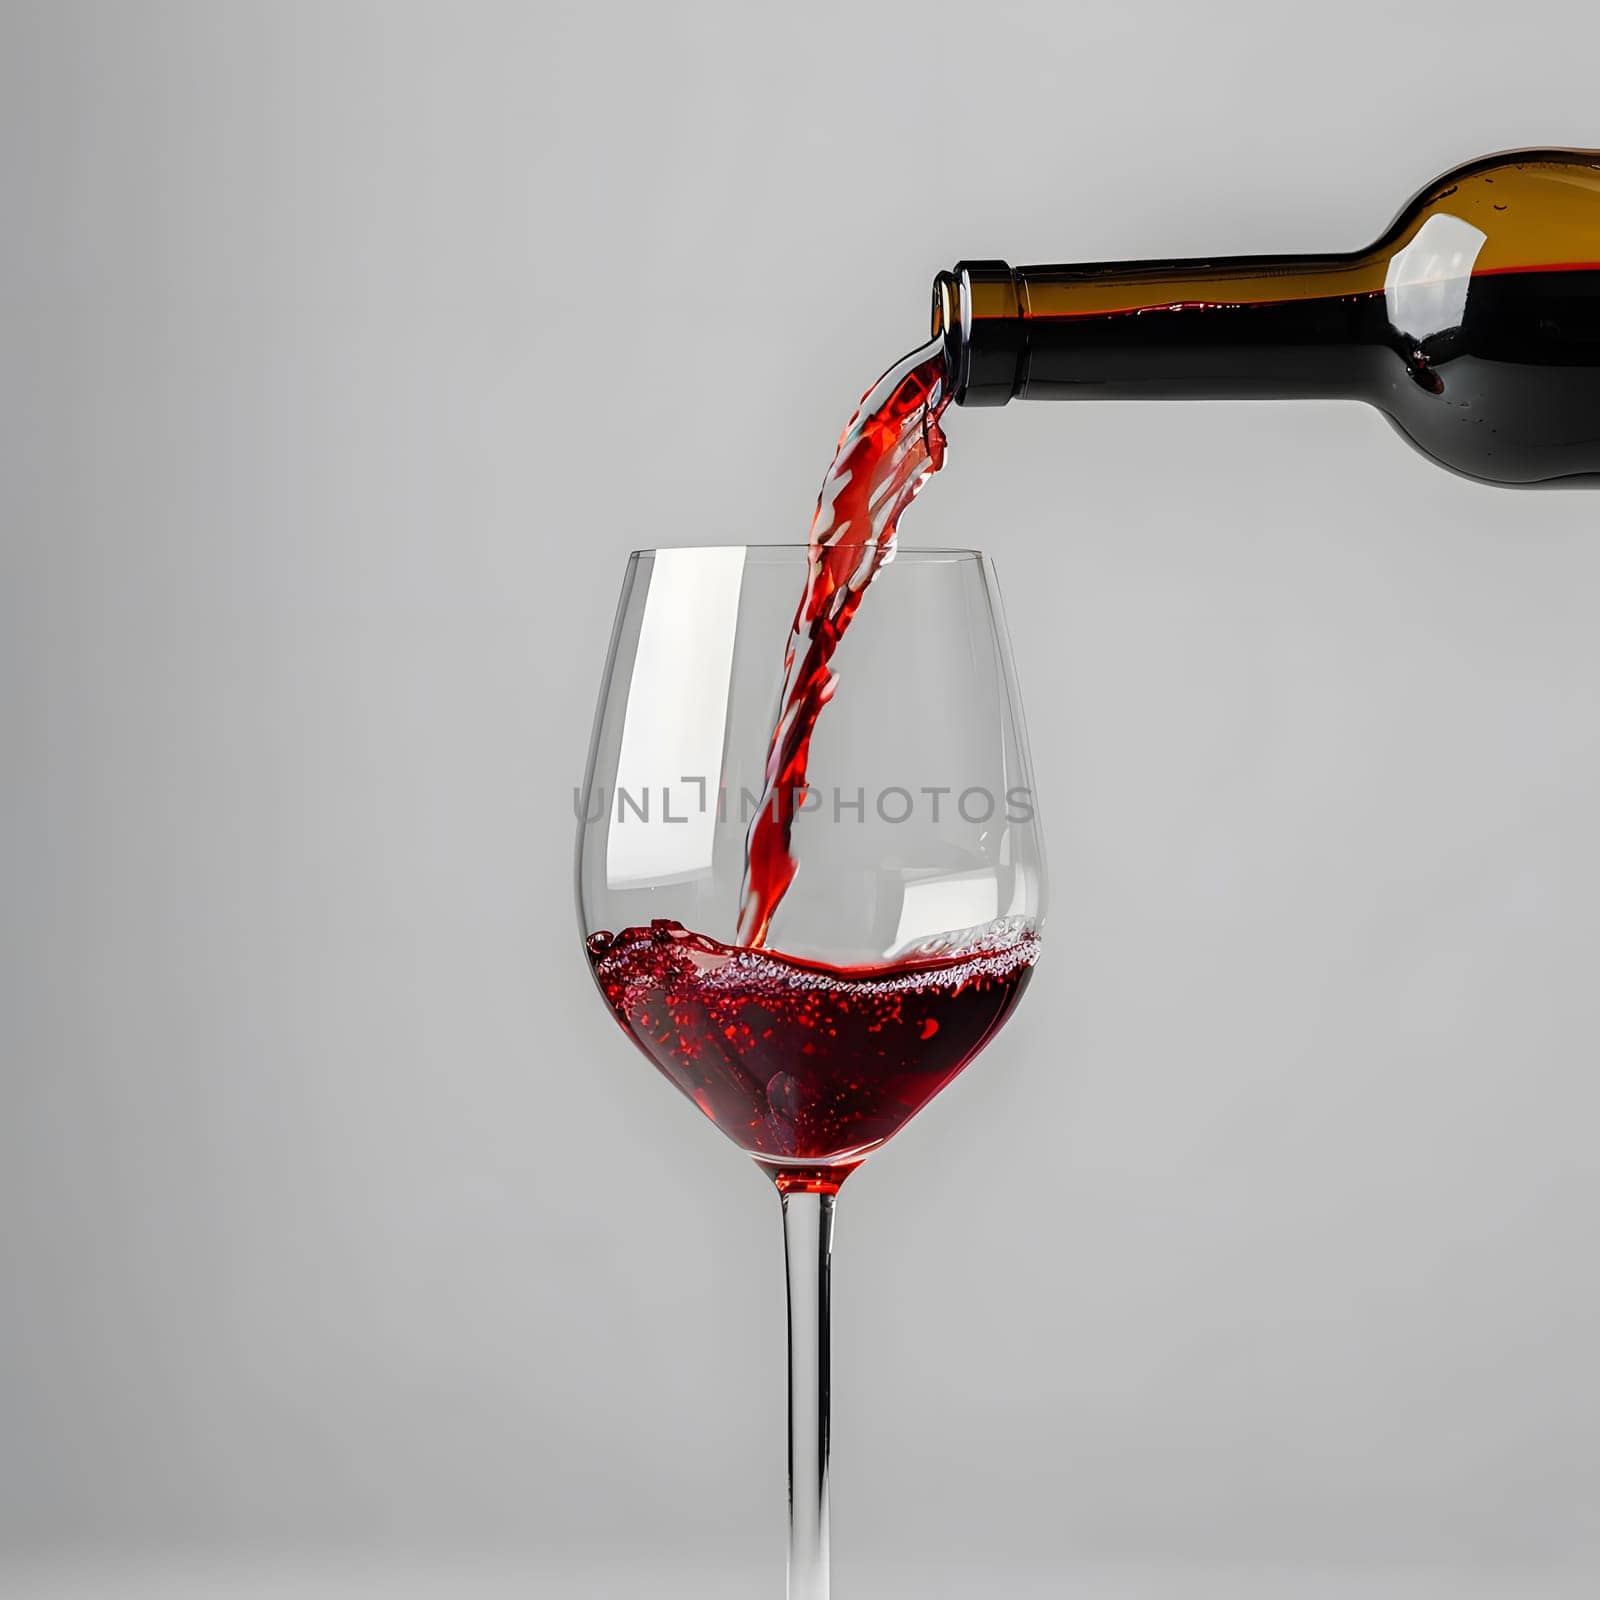 Red wine being gracefully poured from a bottle into a stemmed wine glass, creating a smooth flow of the rich, aromatic liquid into the elegant drinkware